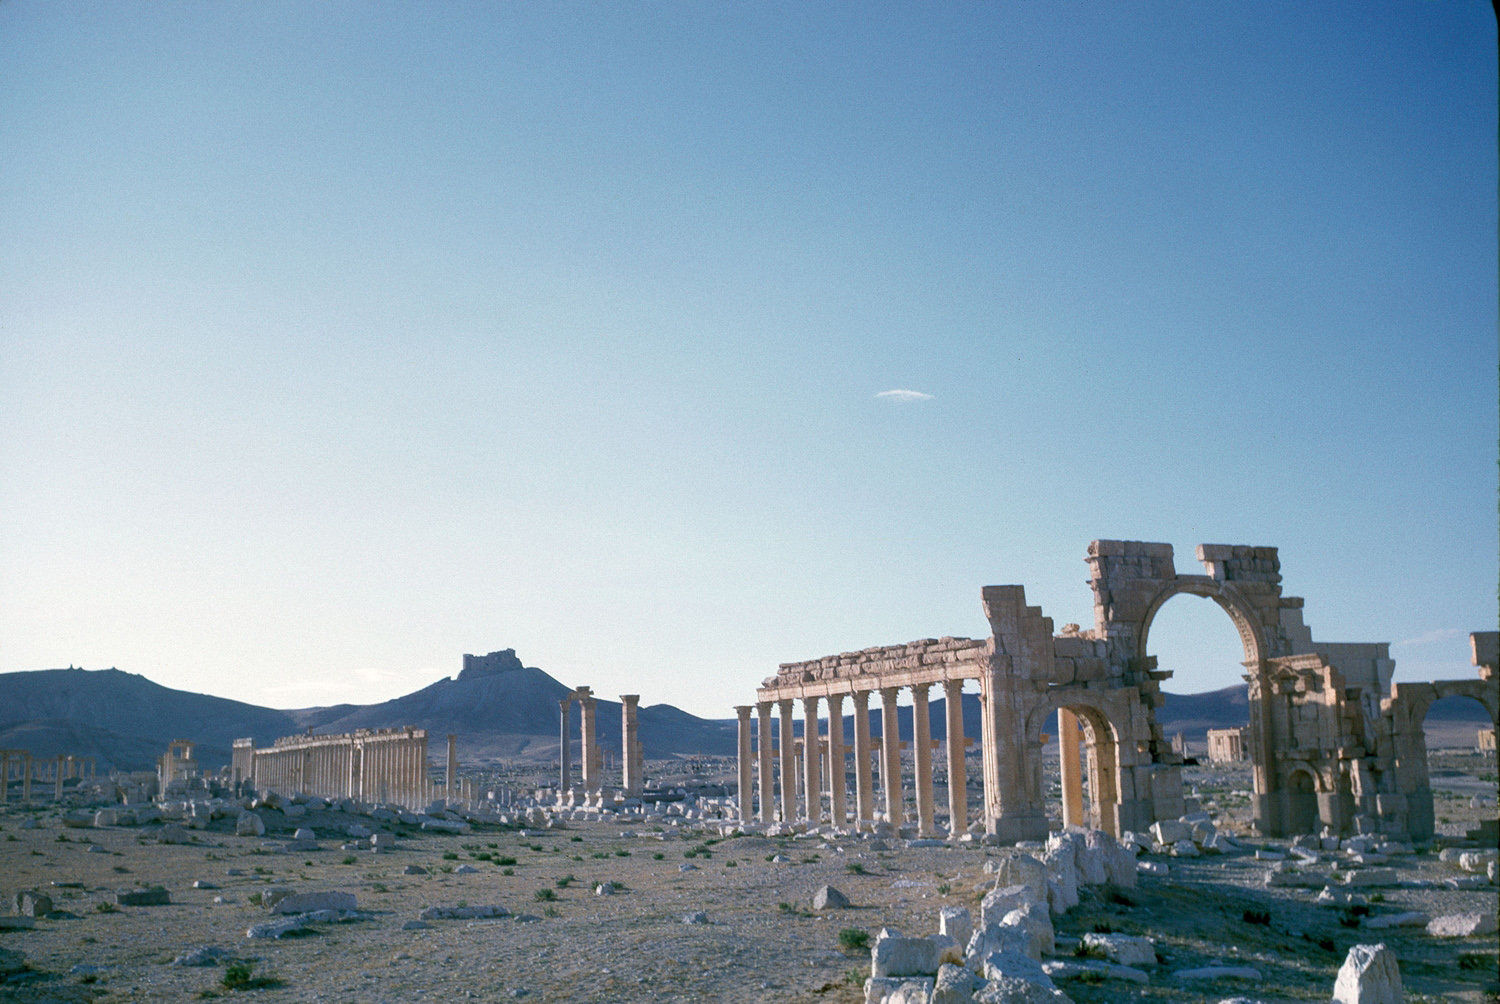 General view of the Great Colonnade. The triumphal arches were reported destroyed in October 2015